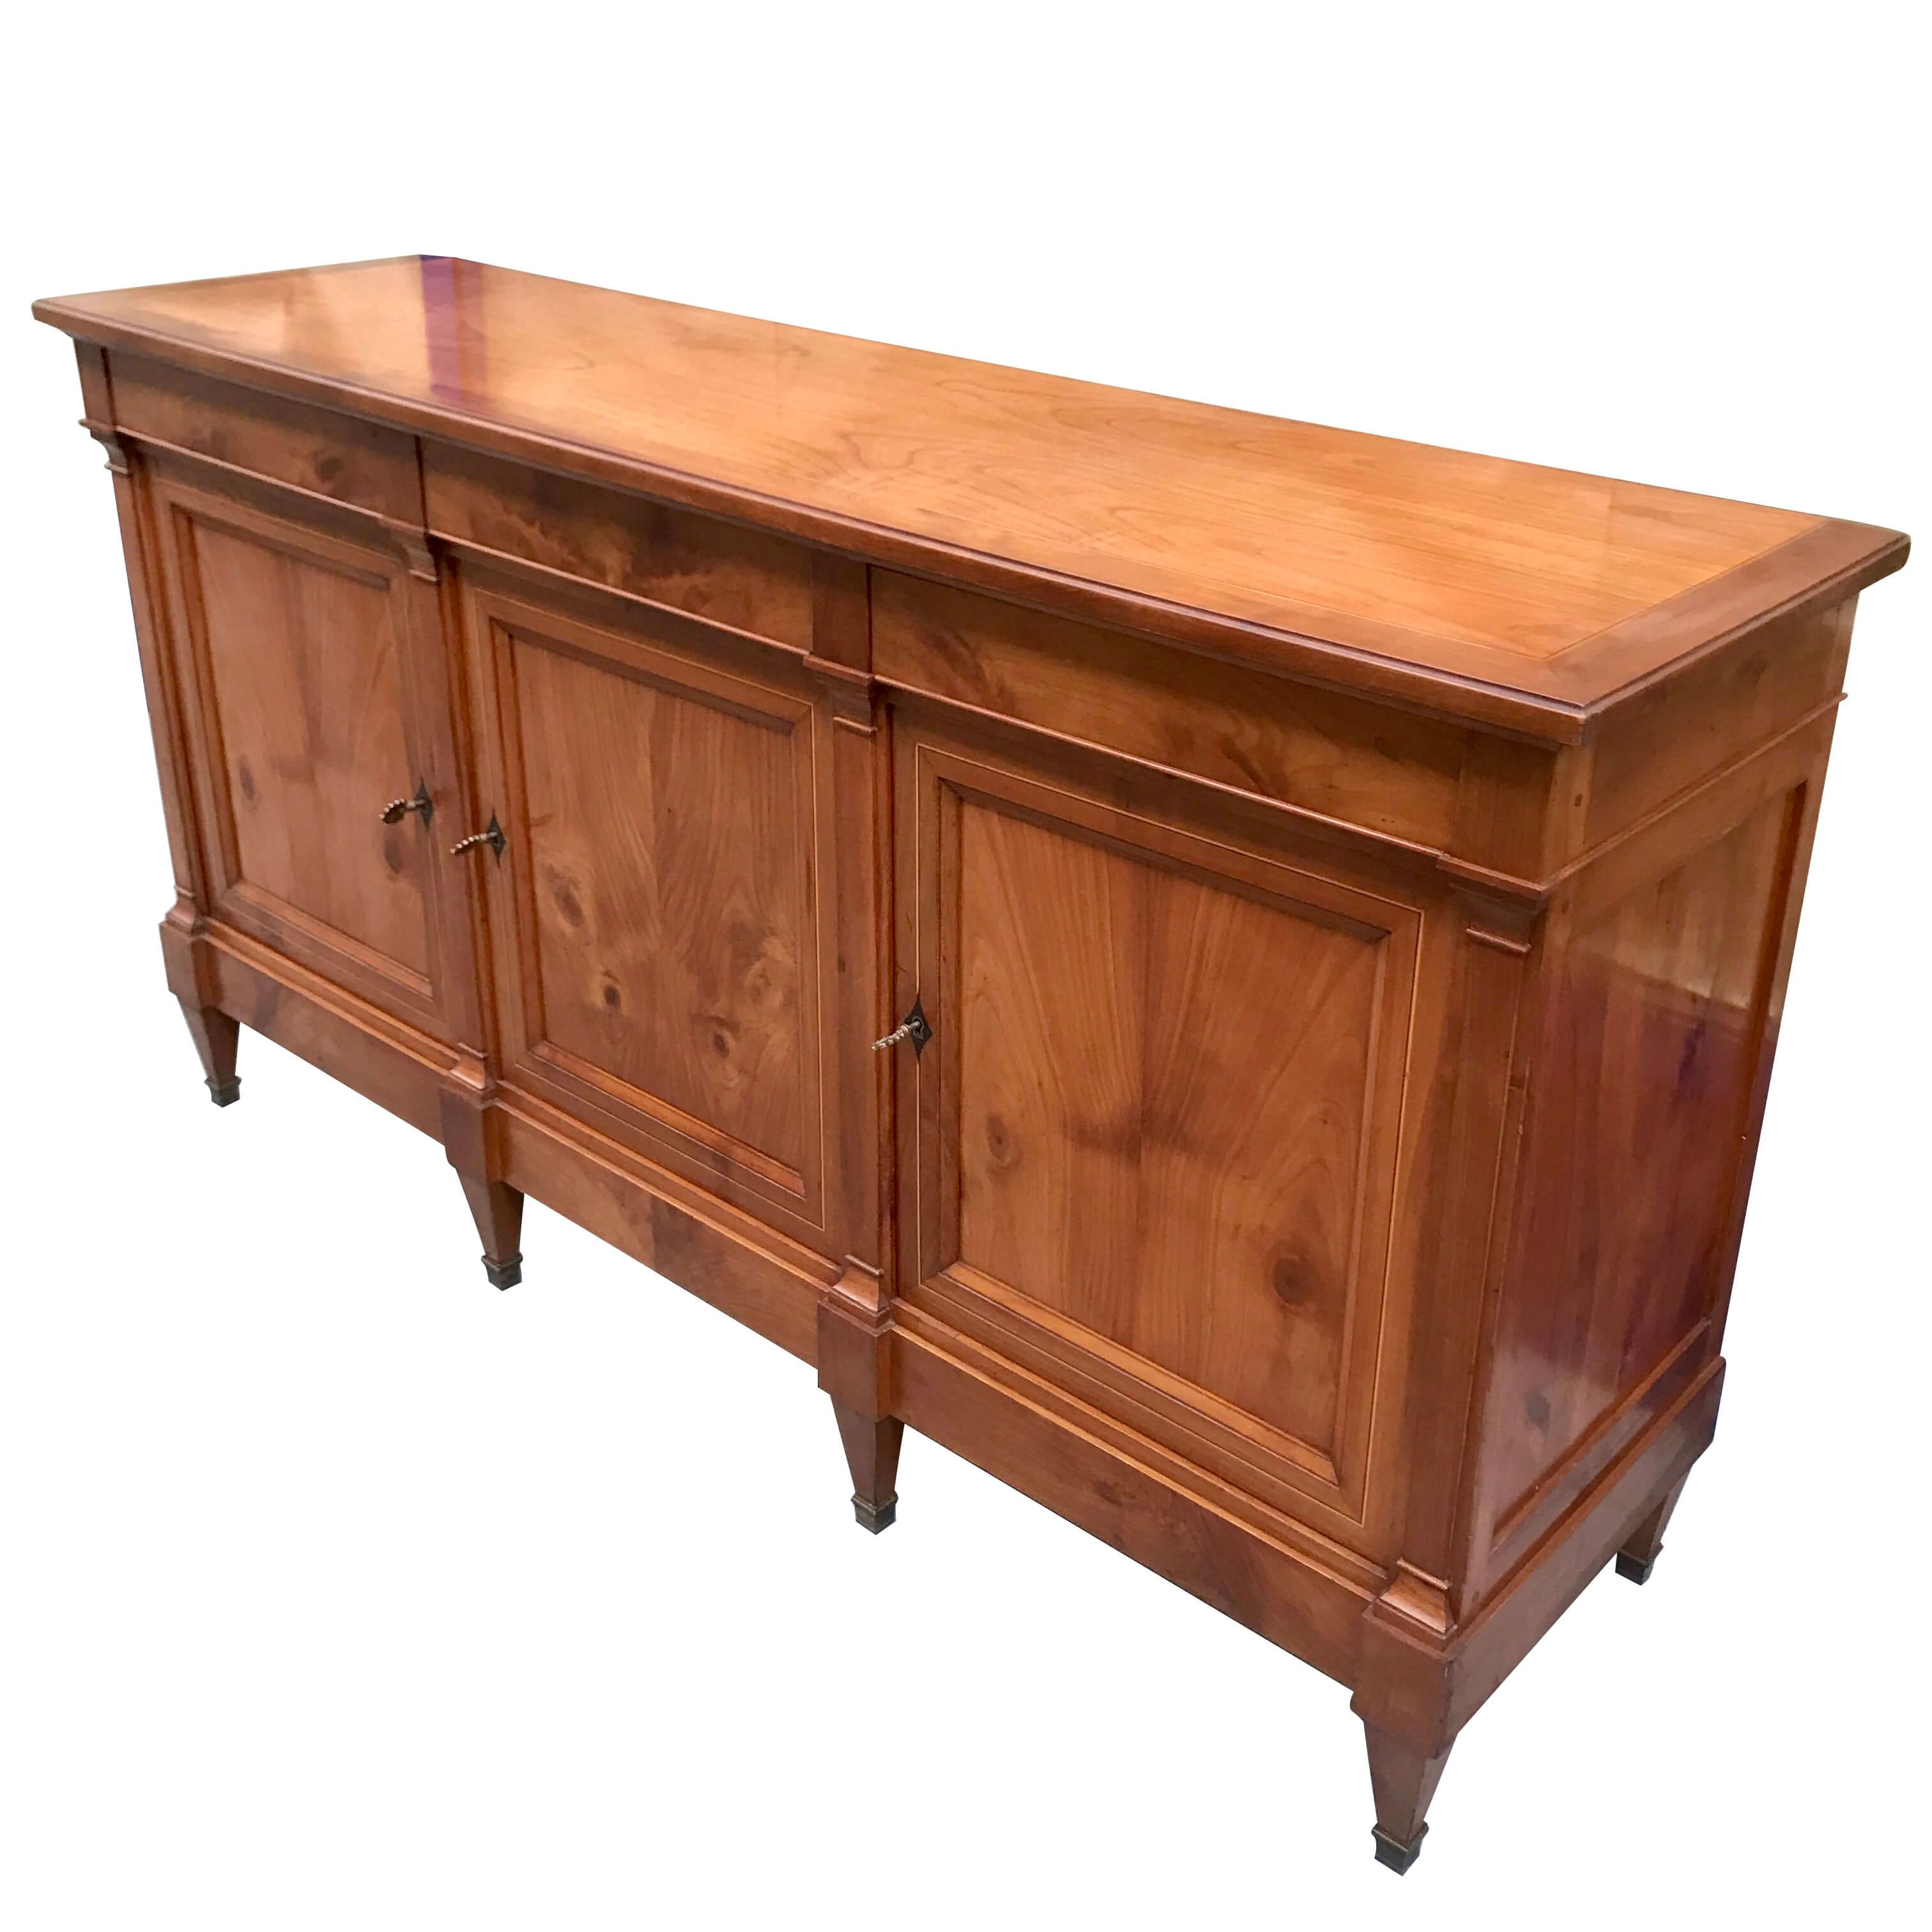 Directoire Style Sideboard With 3 Doors And 3 Drawers In Cherry Wood With  Inlaid Fillets And Bronze Brackets, 19th Century | Intondo For Recent Sideboard Storage Cabinet With 3 Drawers & 3 Doors (View 13 of 15)